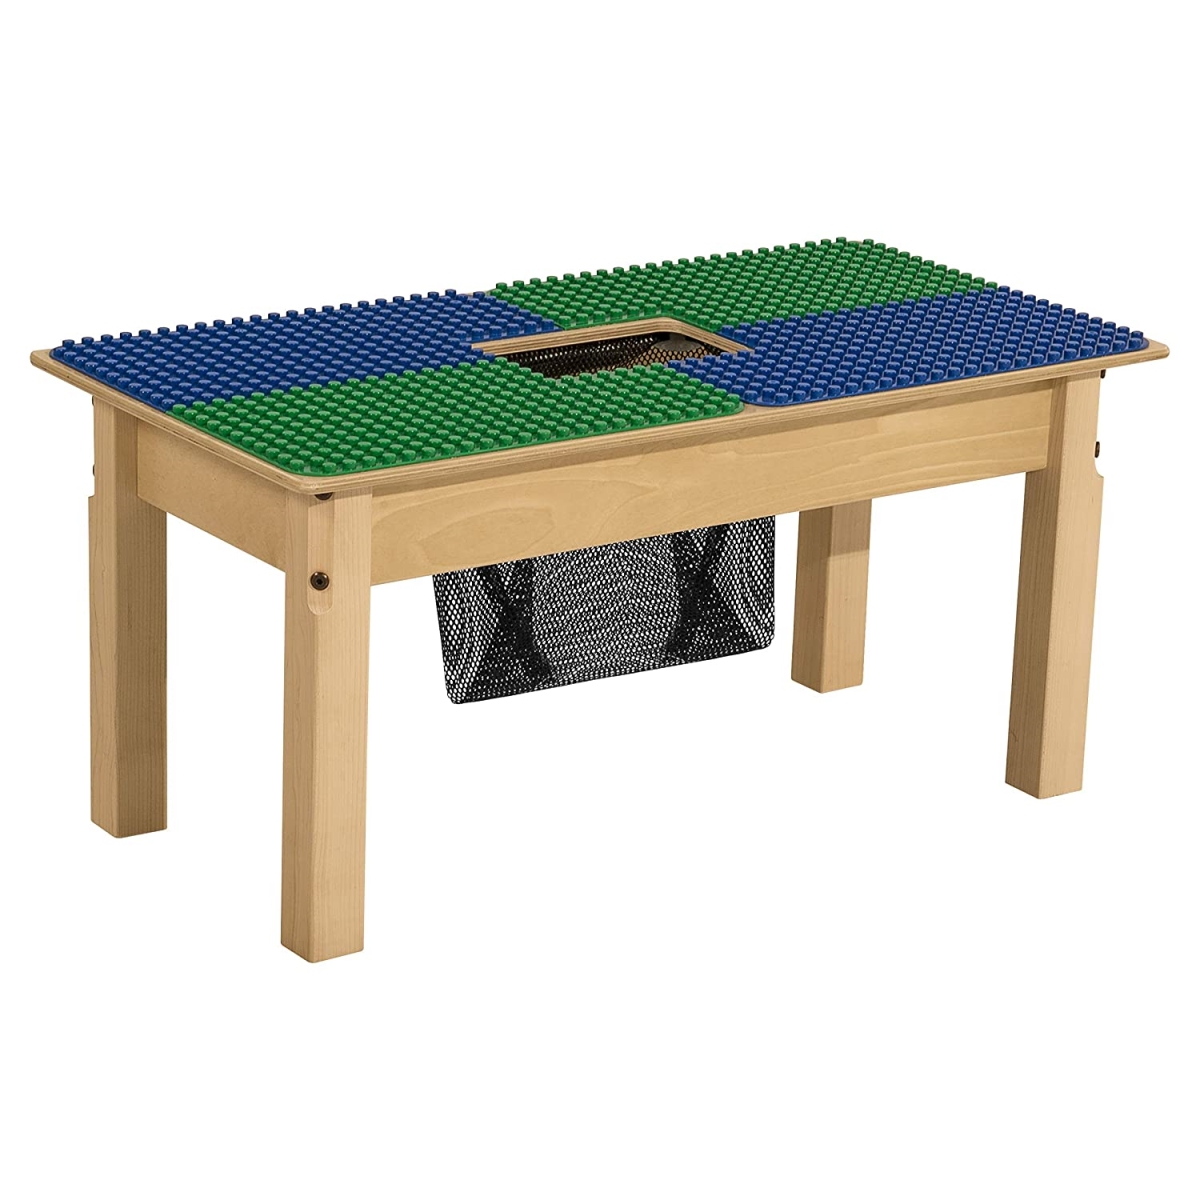 Tp1631pgna1829-bg 18-29 In. Duplo Compatible Table With Adjustable Legs, Blue & Green - Rectangle